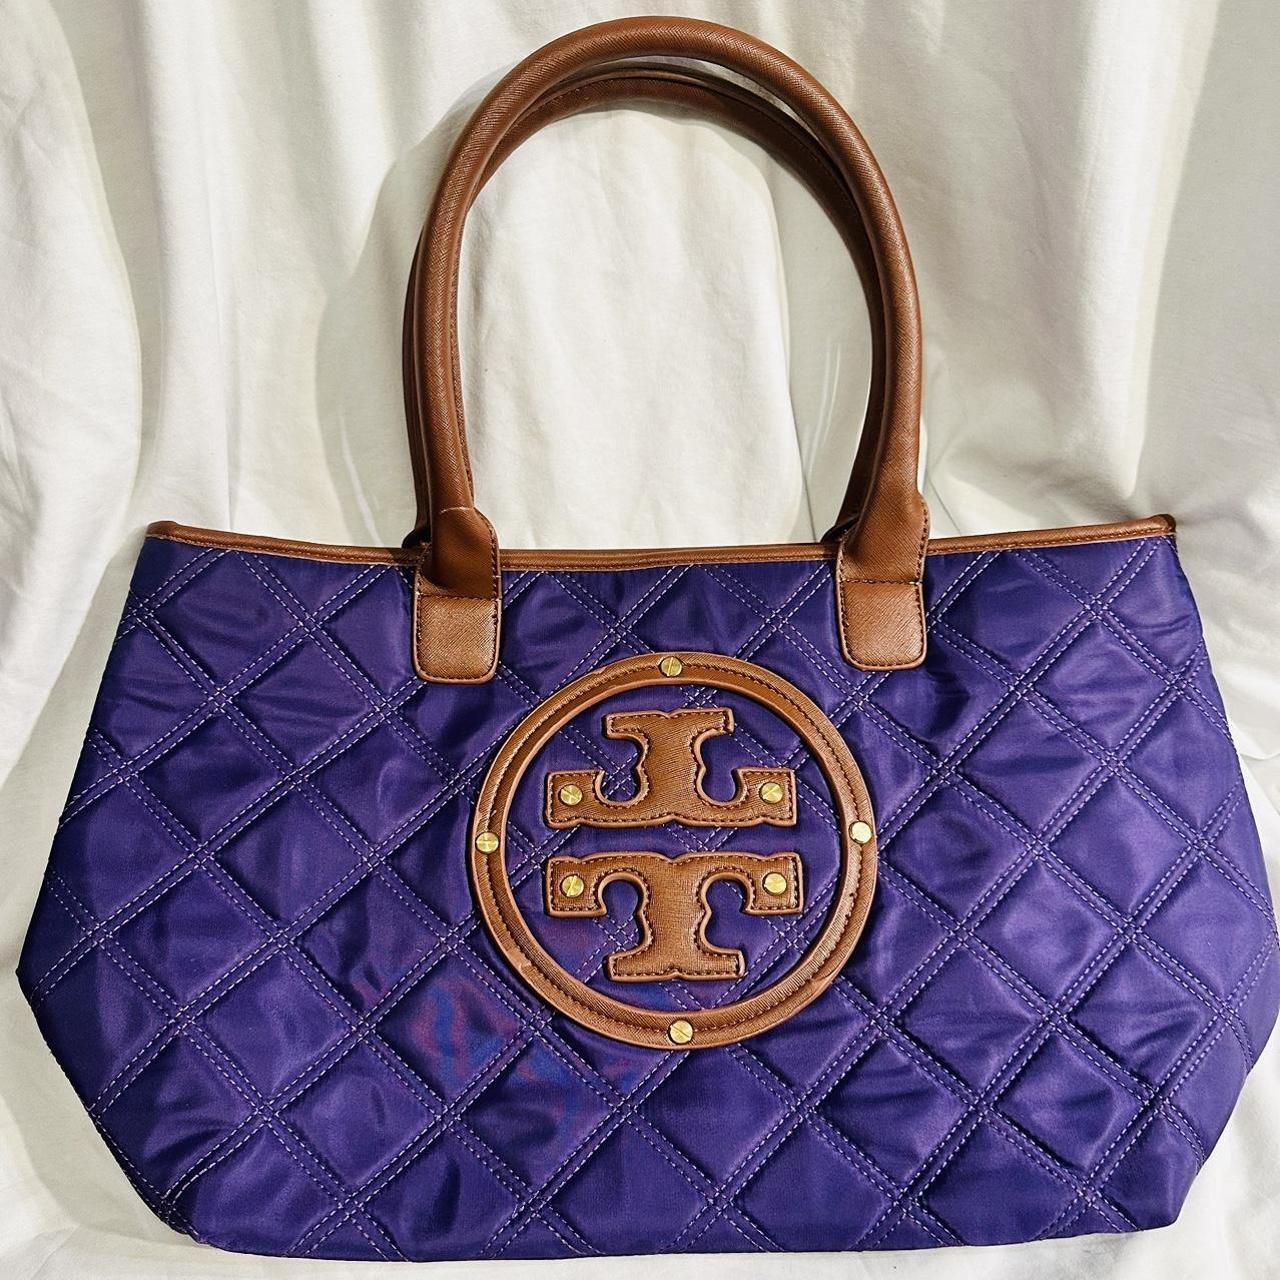 Tory Burch 'fleming' Medium Quilted Leather Bag in Purple | Lyst